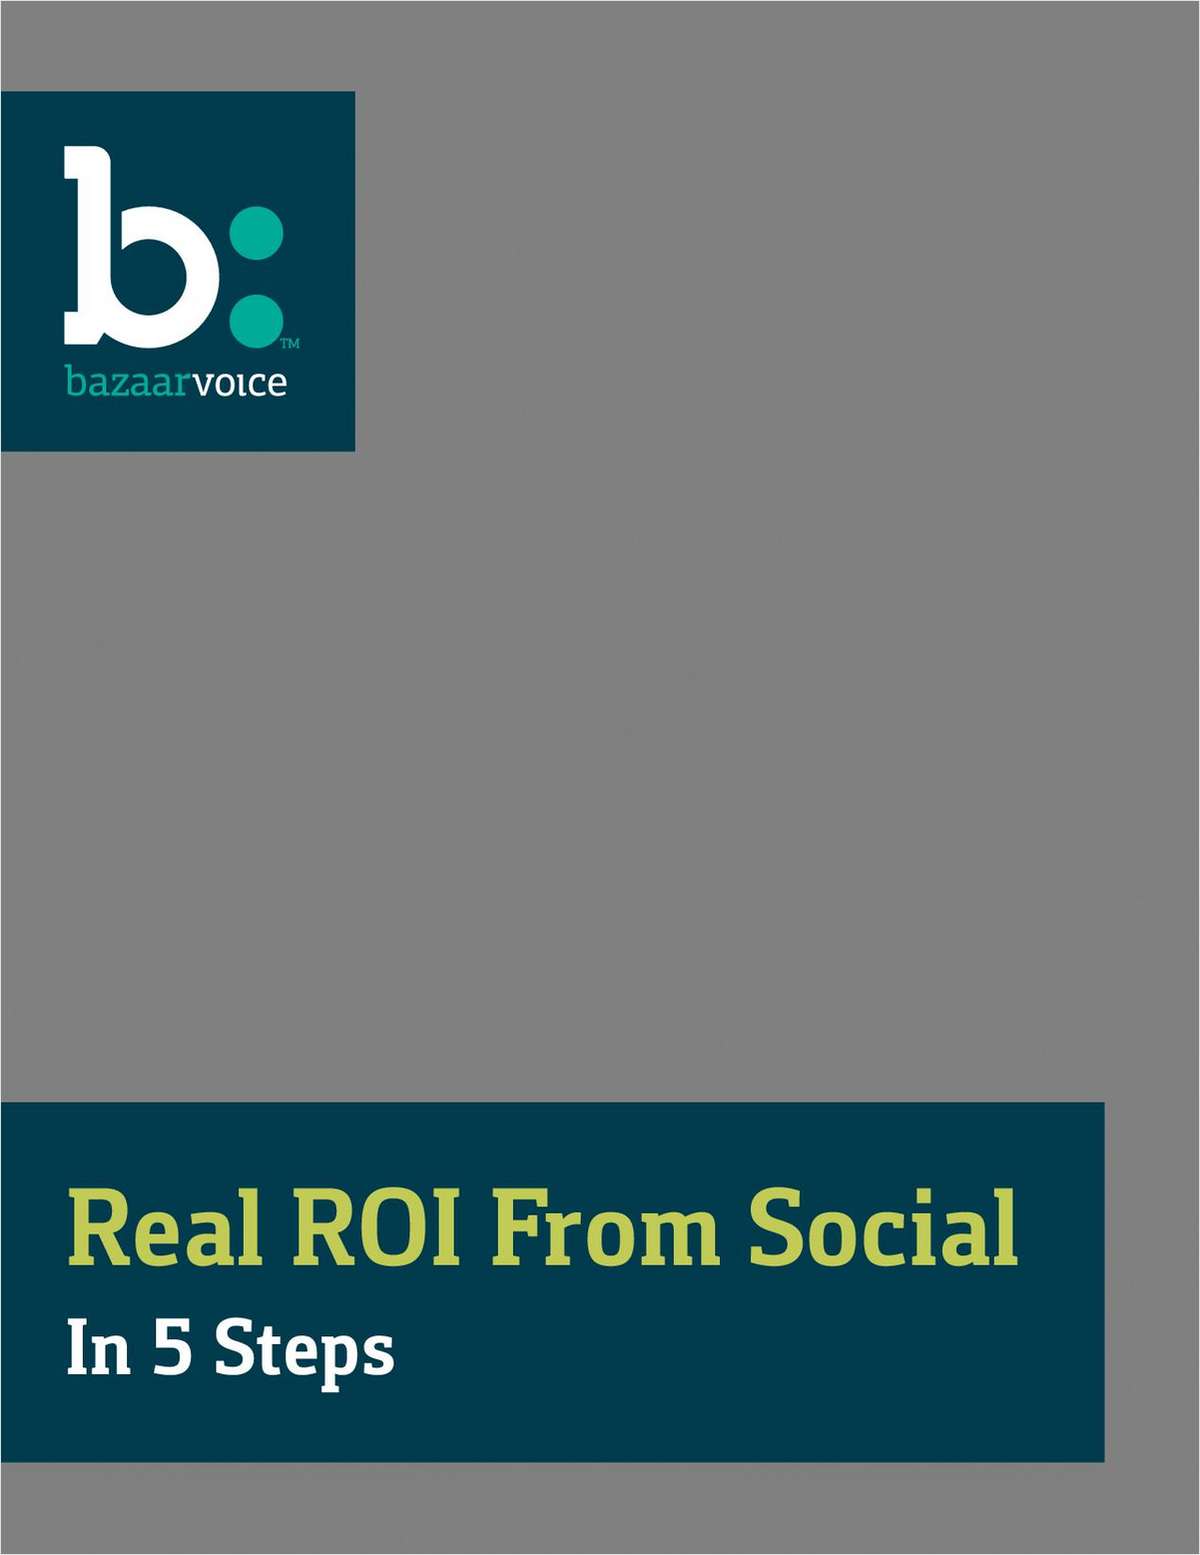 Capture Your ROI From Social In 5 Steps